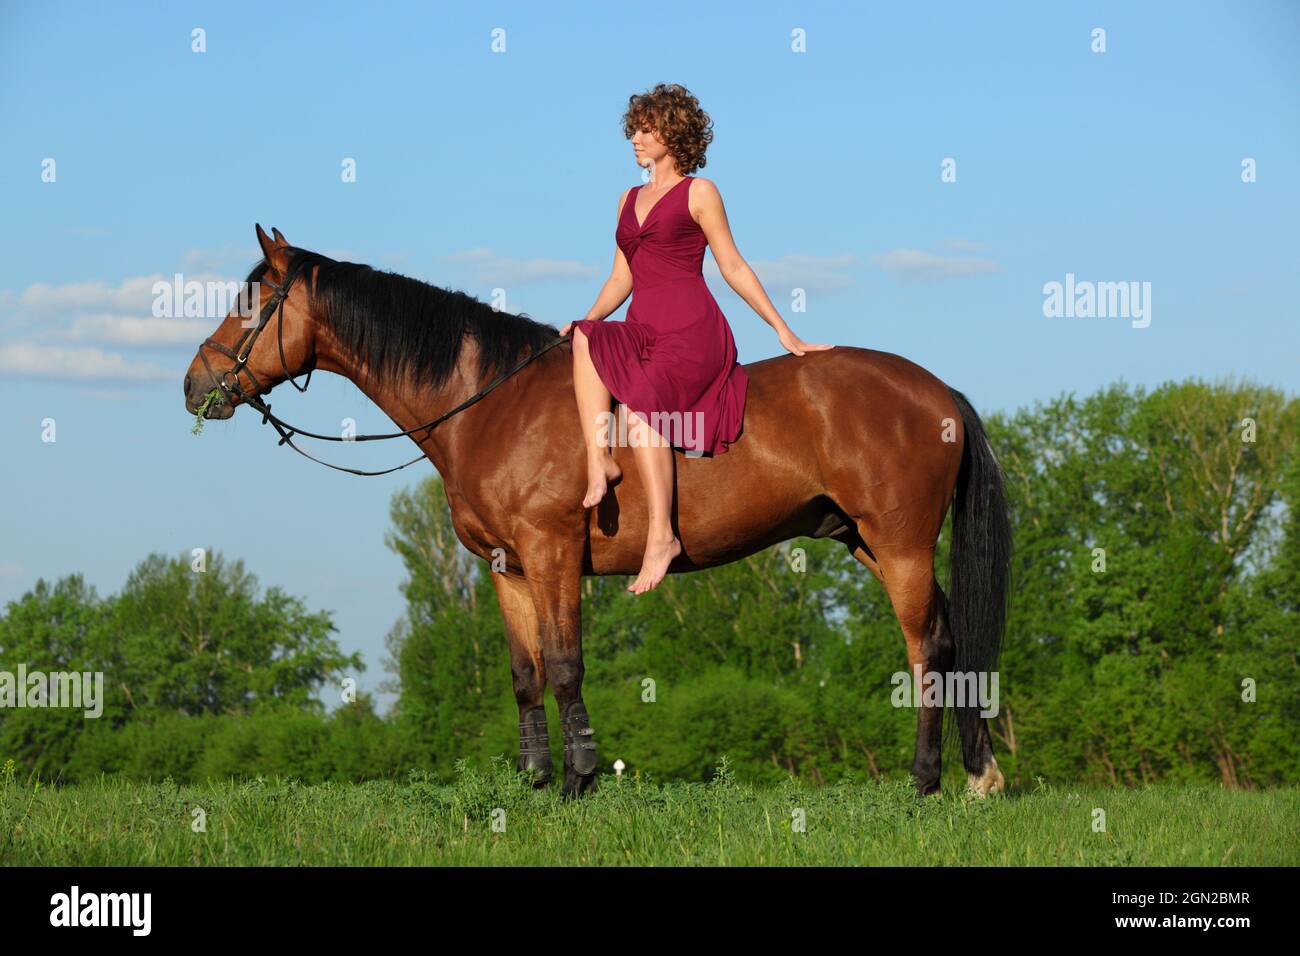 Equestrian woman in the red dress riding horse in summer nature Stock Photo